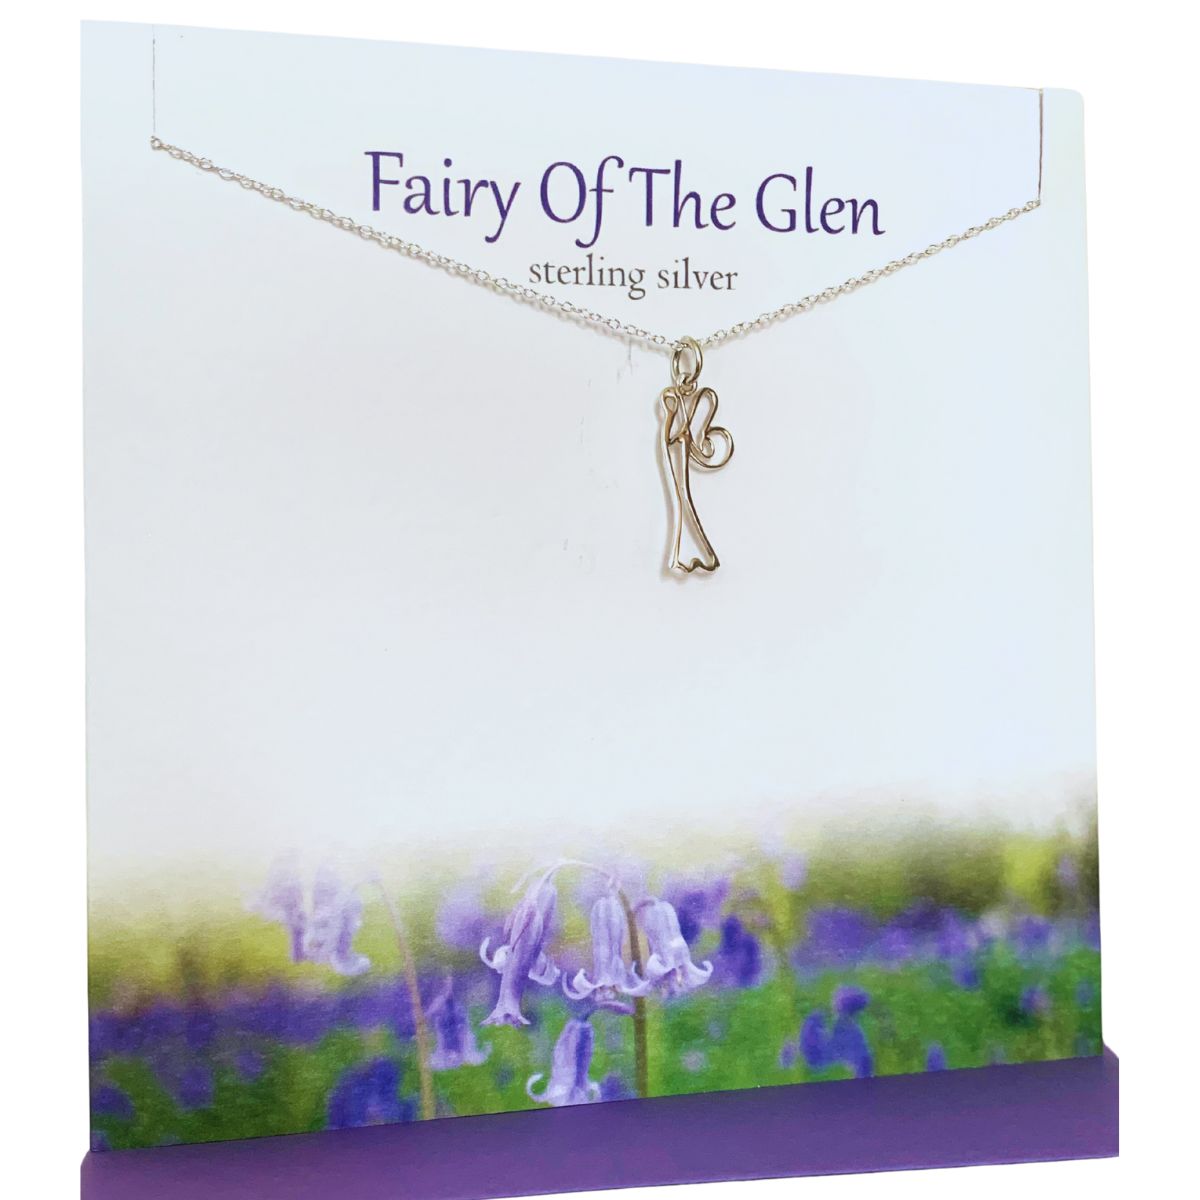 Silver pendant necklace featuring the outline of a fairy presented on a greeting card with bluebells along the bottom edge. The card says 'Fairy Of The Glen' Sterling Silver'